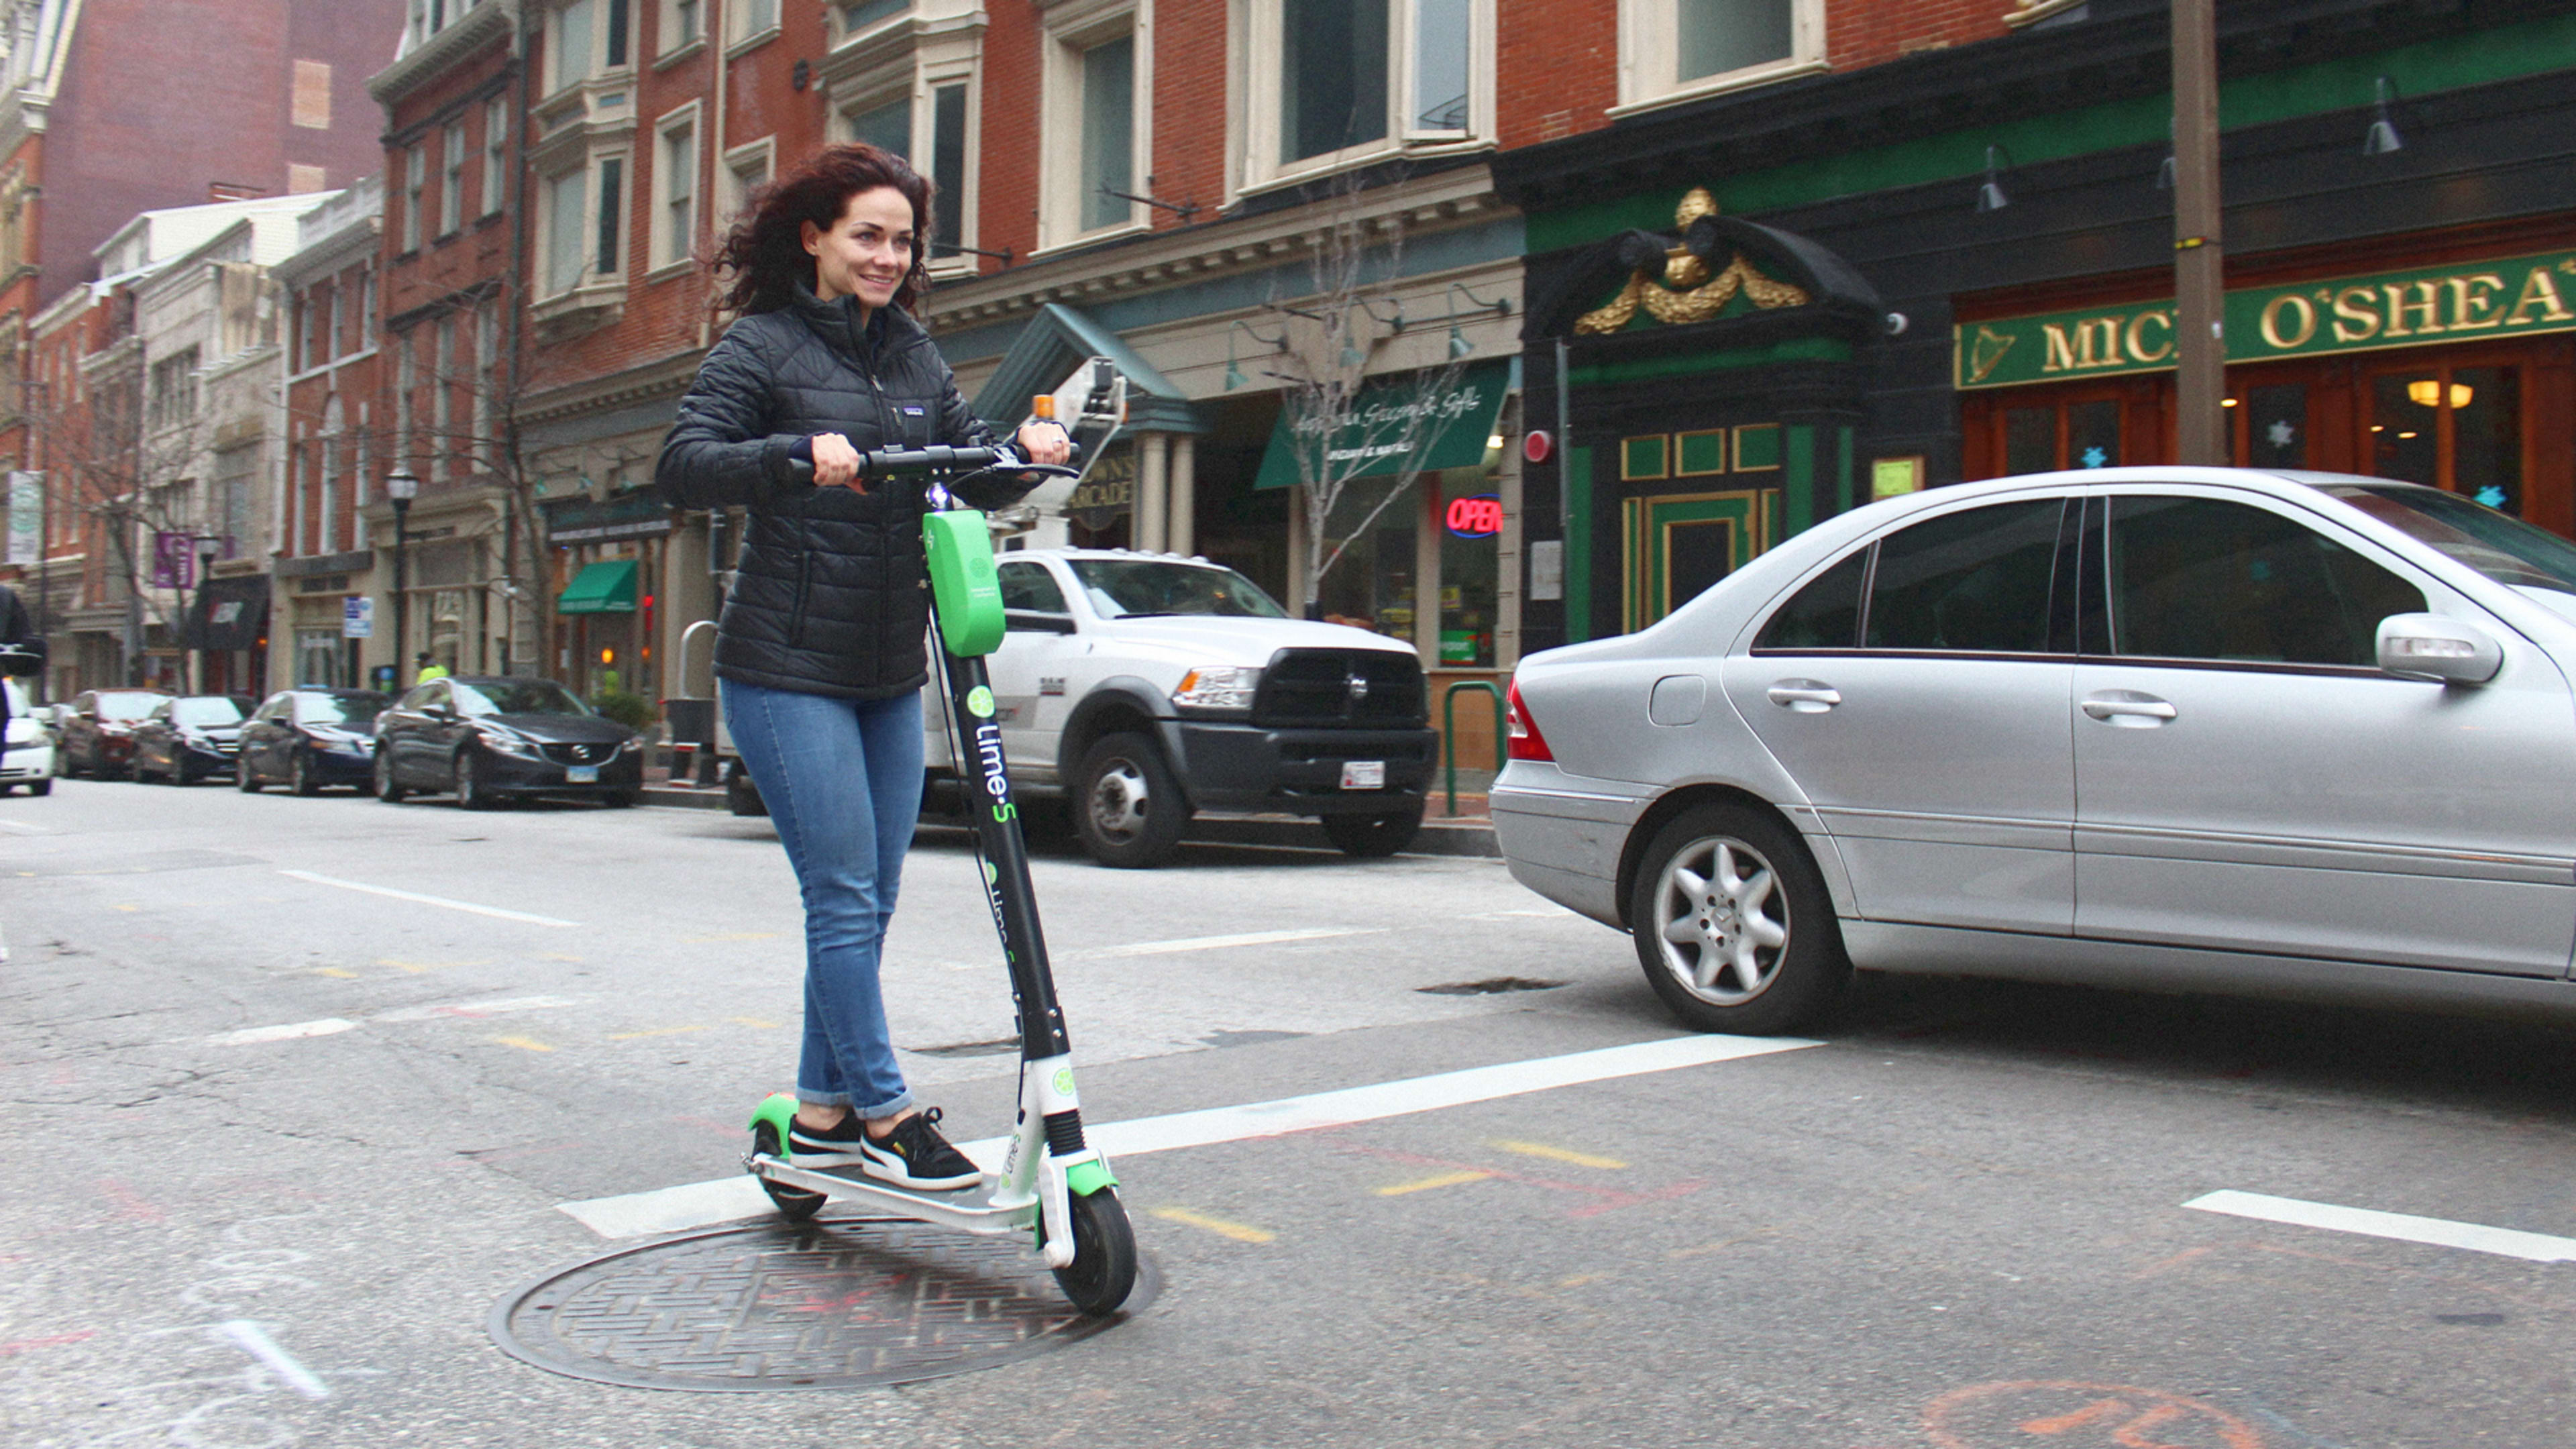 Are shared e-scooters good for the planet? Only if they replace car trips